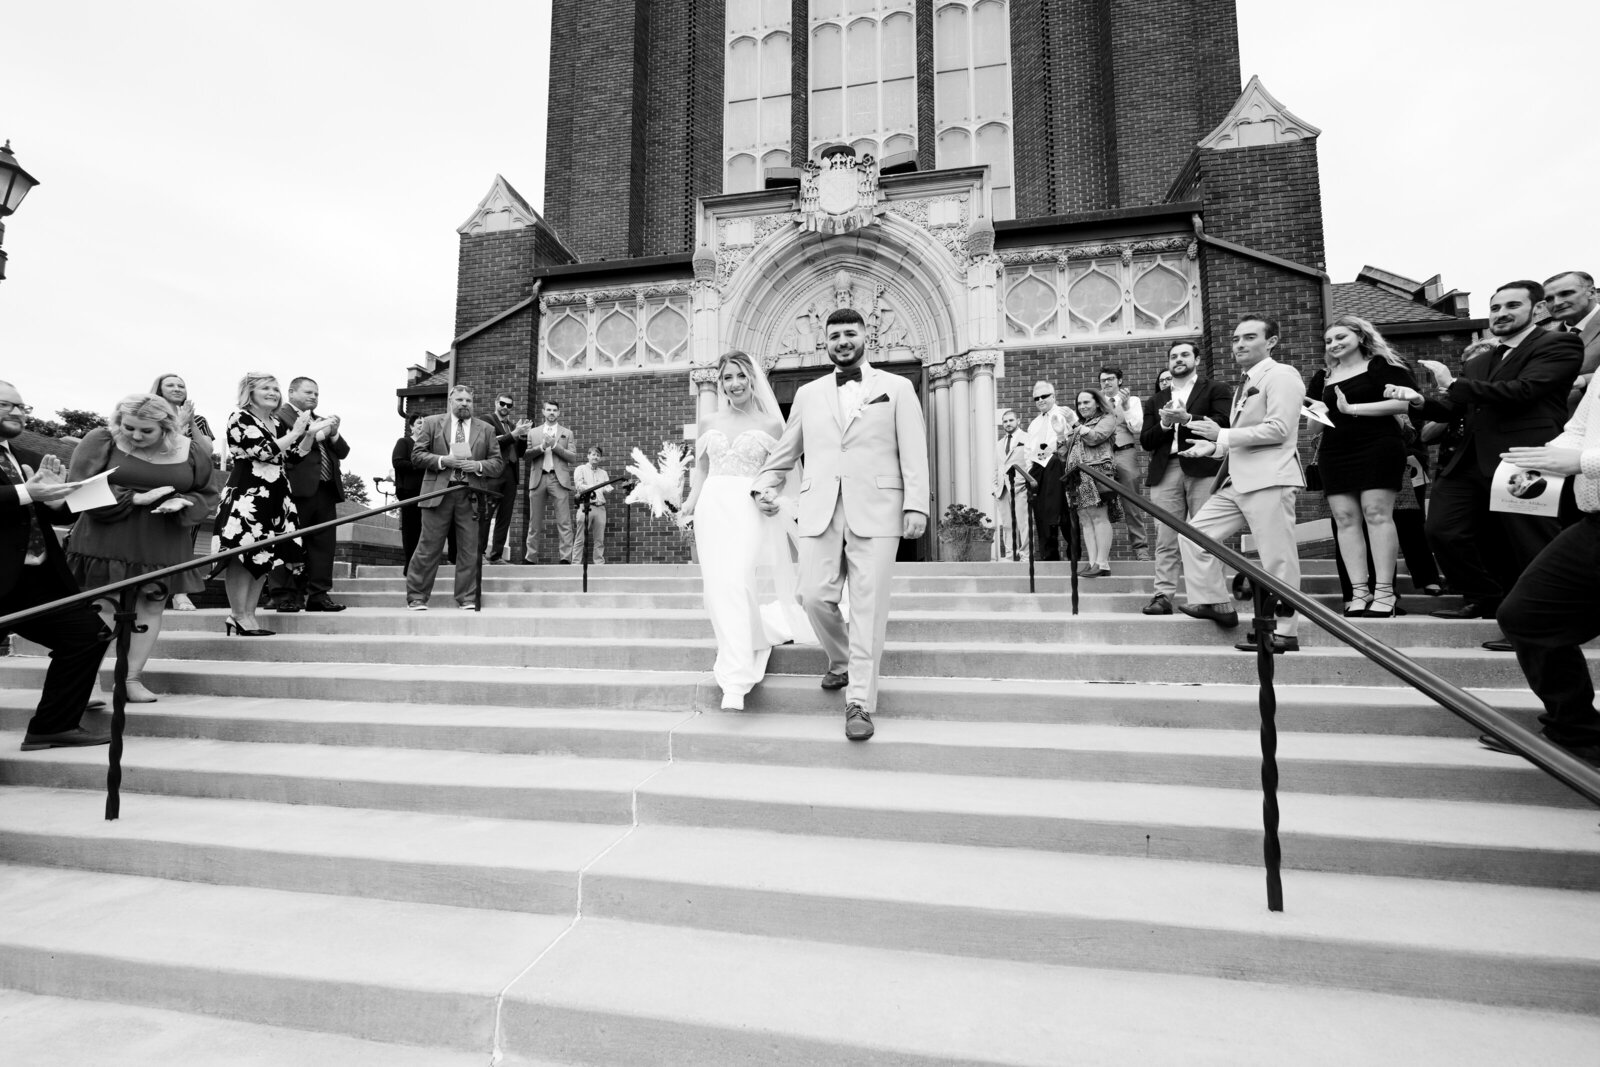 Youngstown bride and groom happily exit St. Patrick's Church in Youngstown, Ohio on their wedding day. Photo taken by Aaron Aldhizer